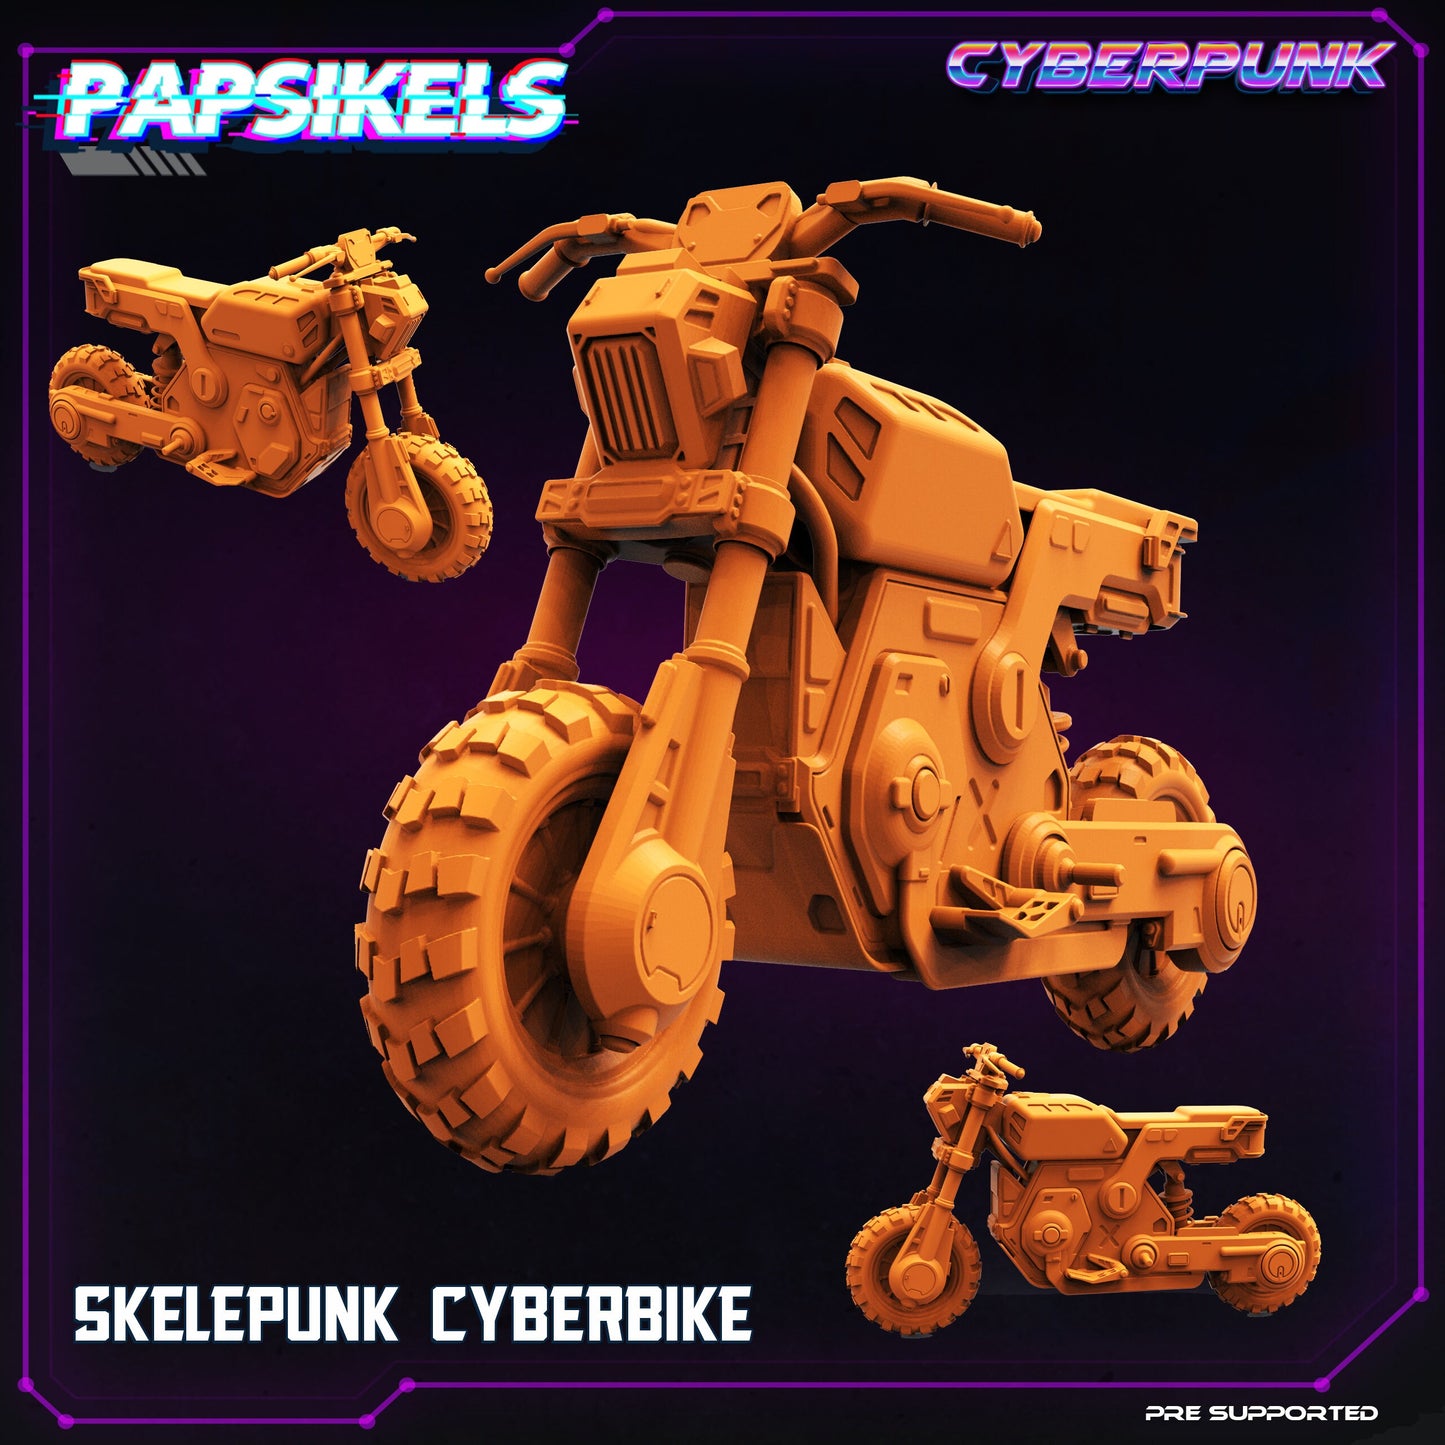 Skelepunk Cyberbike (1) (sculpted by Papsikels)